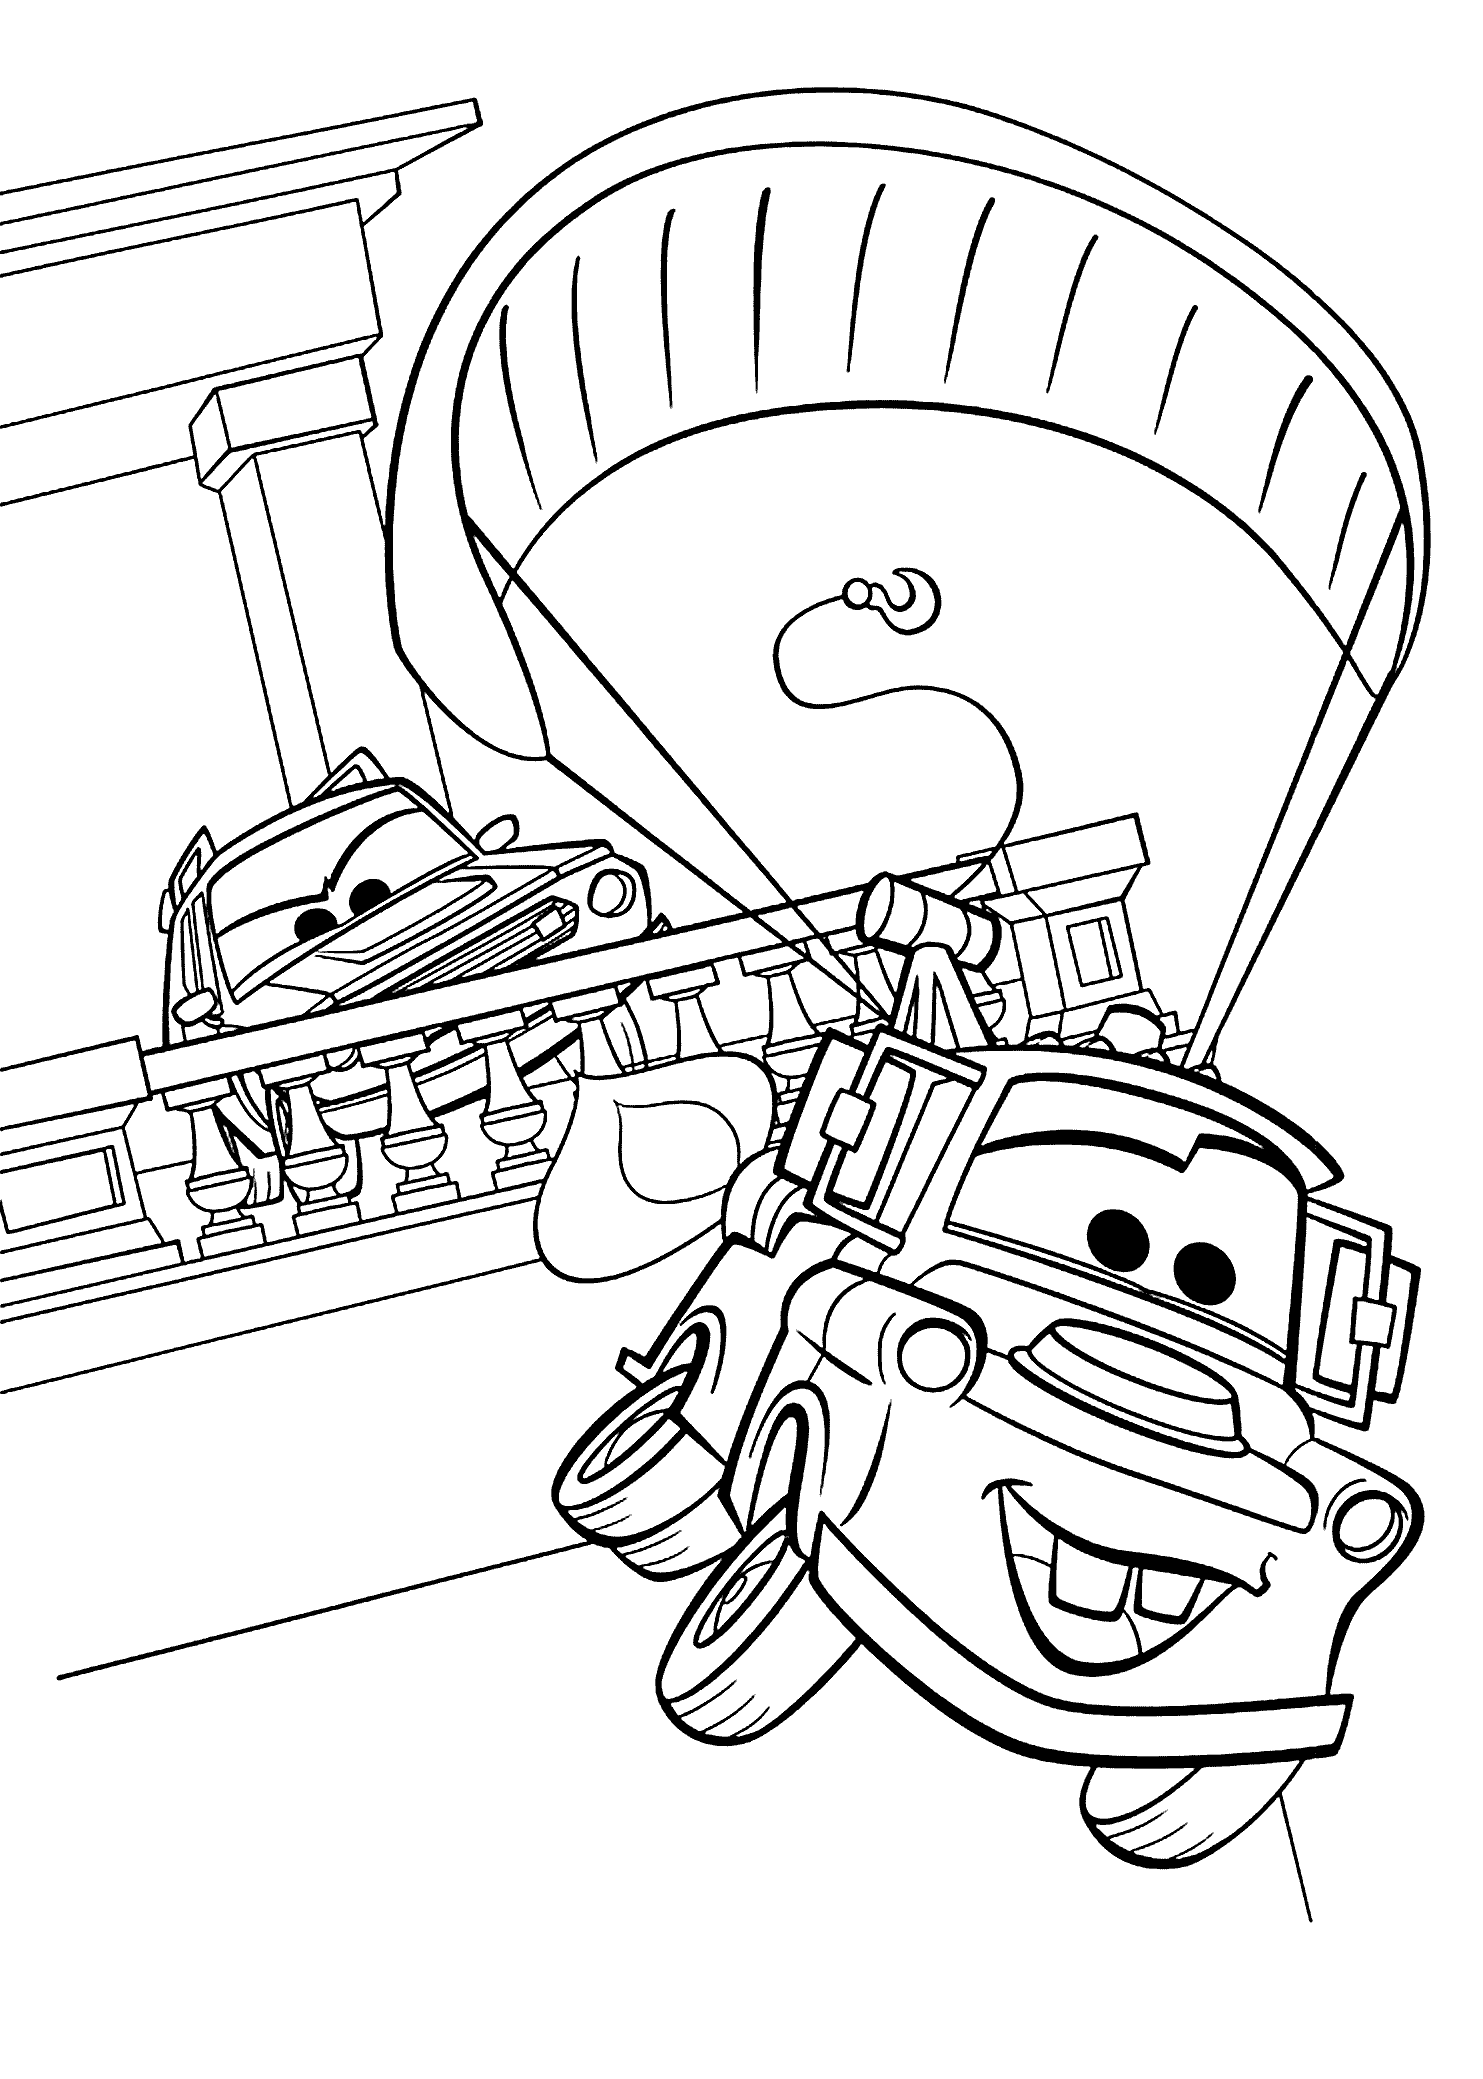 Pixar Cars Coloring Pages